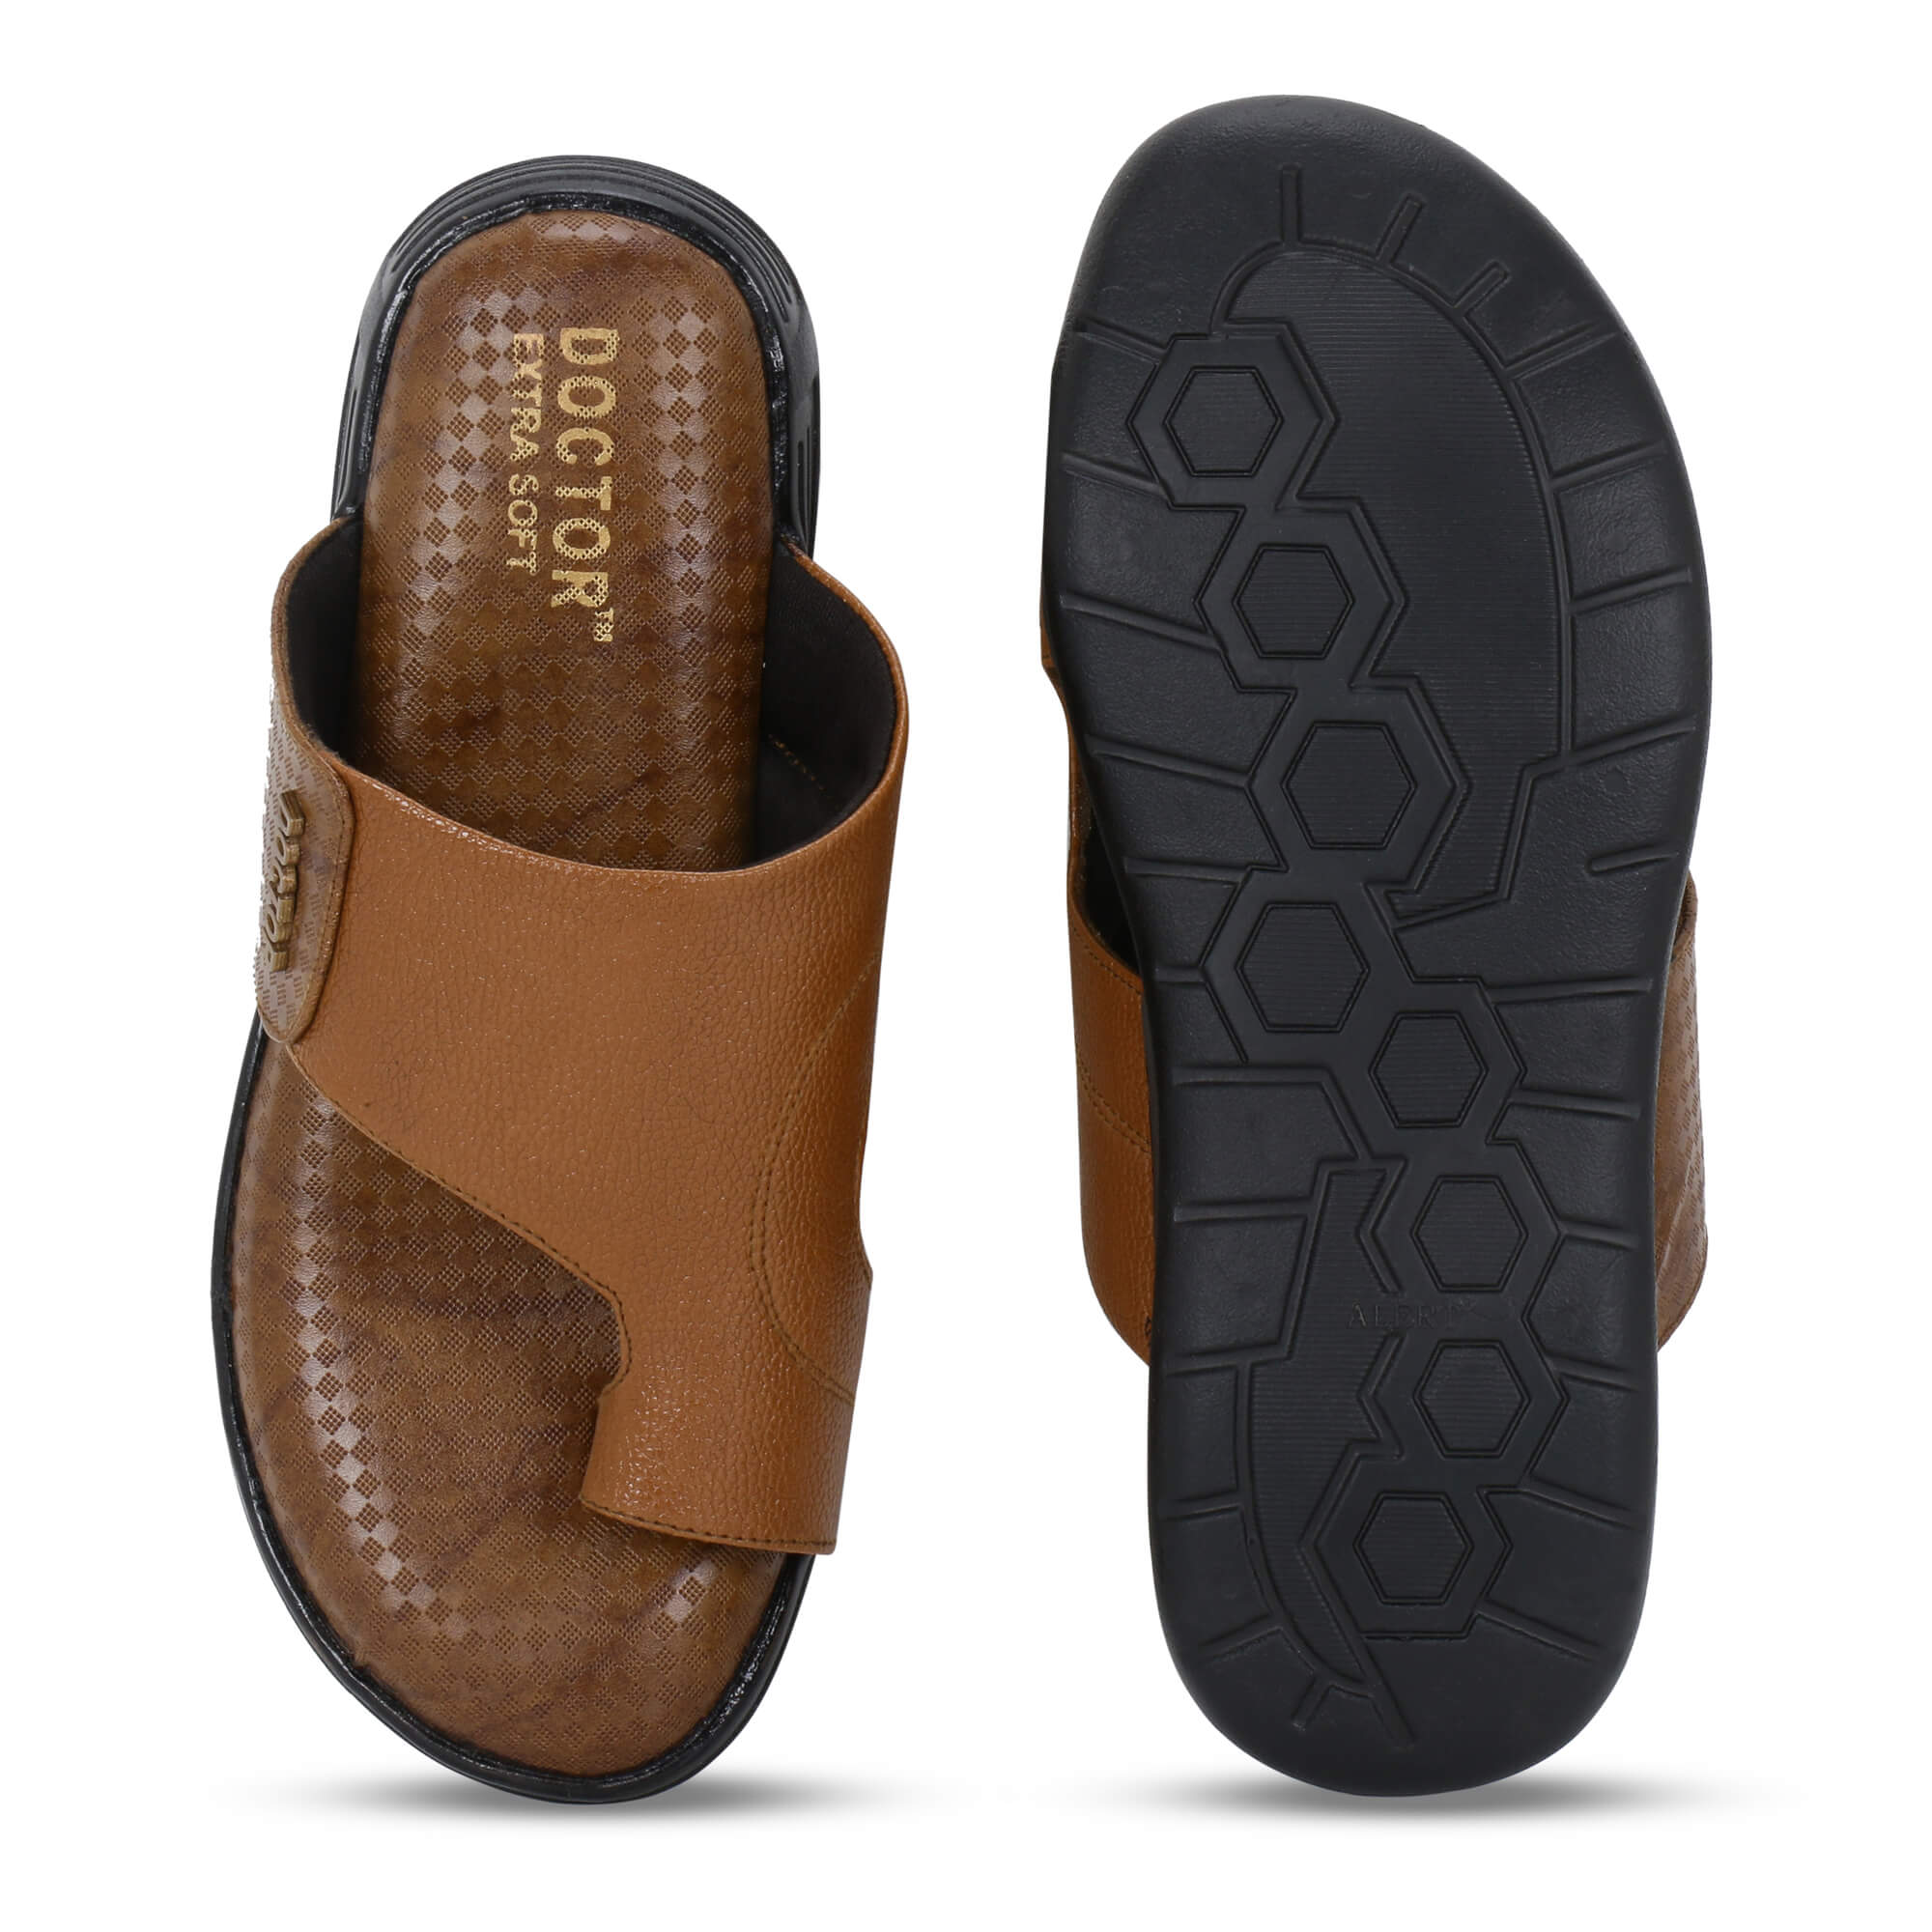 Orthopedic & Diabetic slippers, shoes, accessories for foot pain –  HappyWalk - Orthopedic & Diabetic Footwear Store